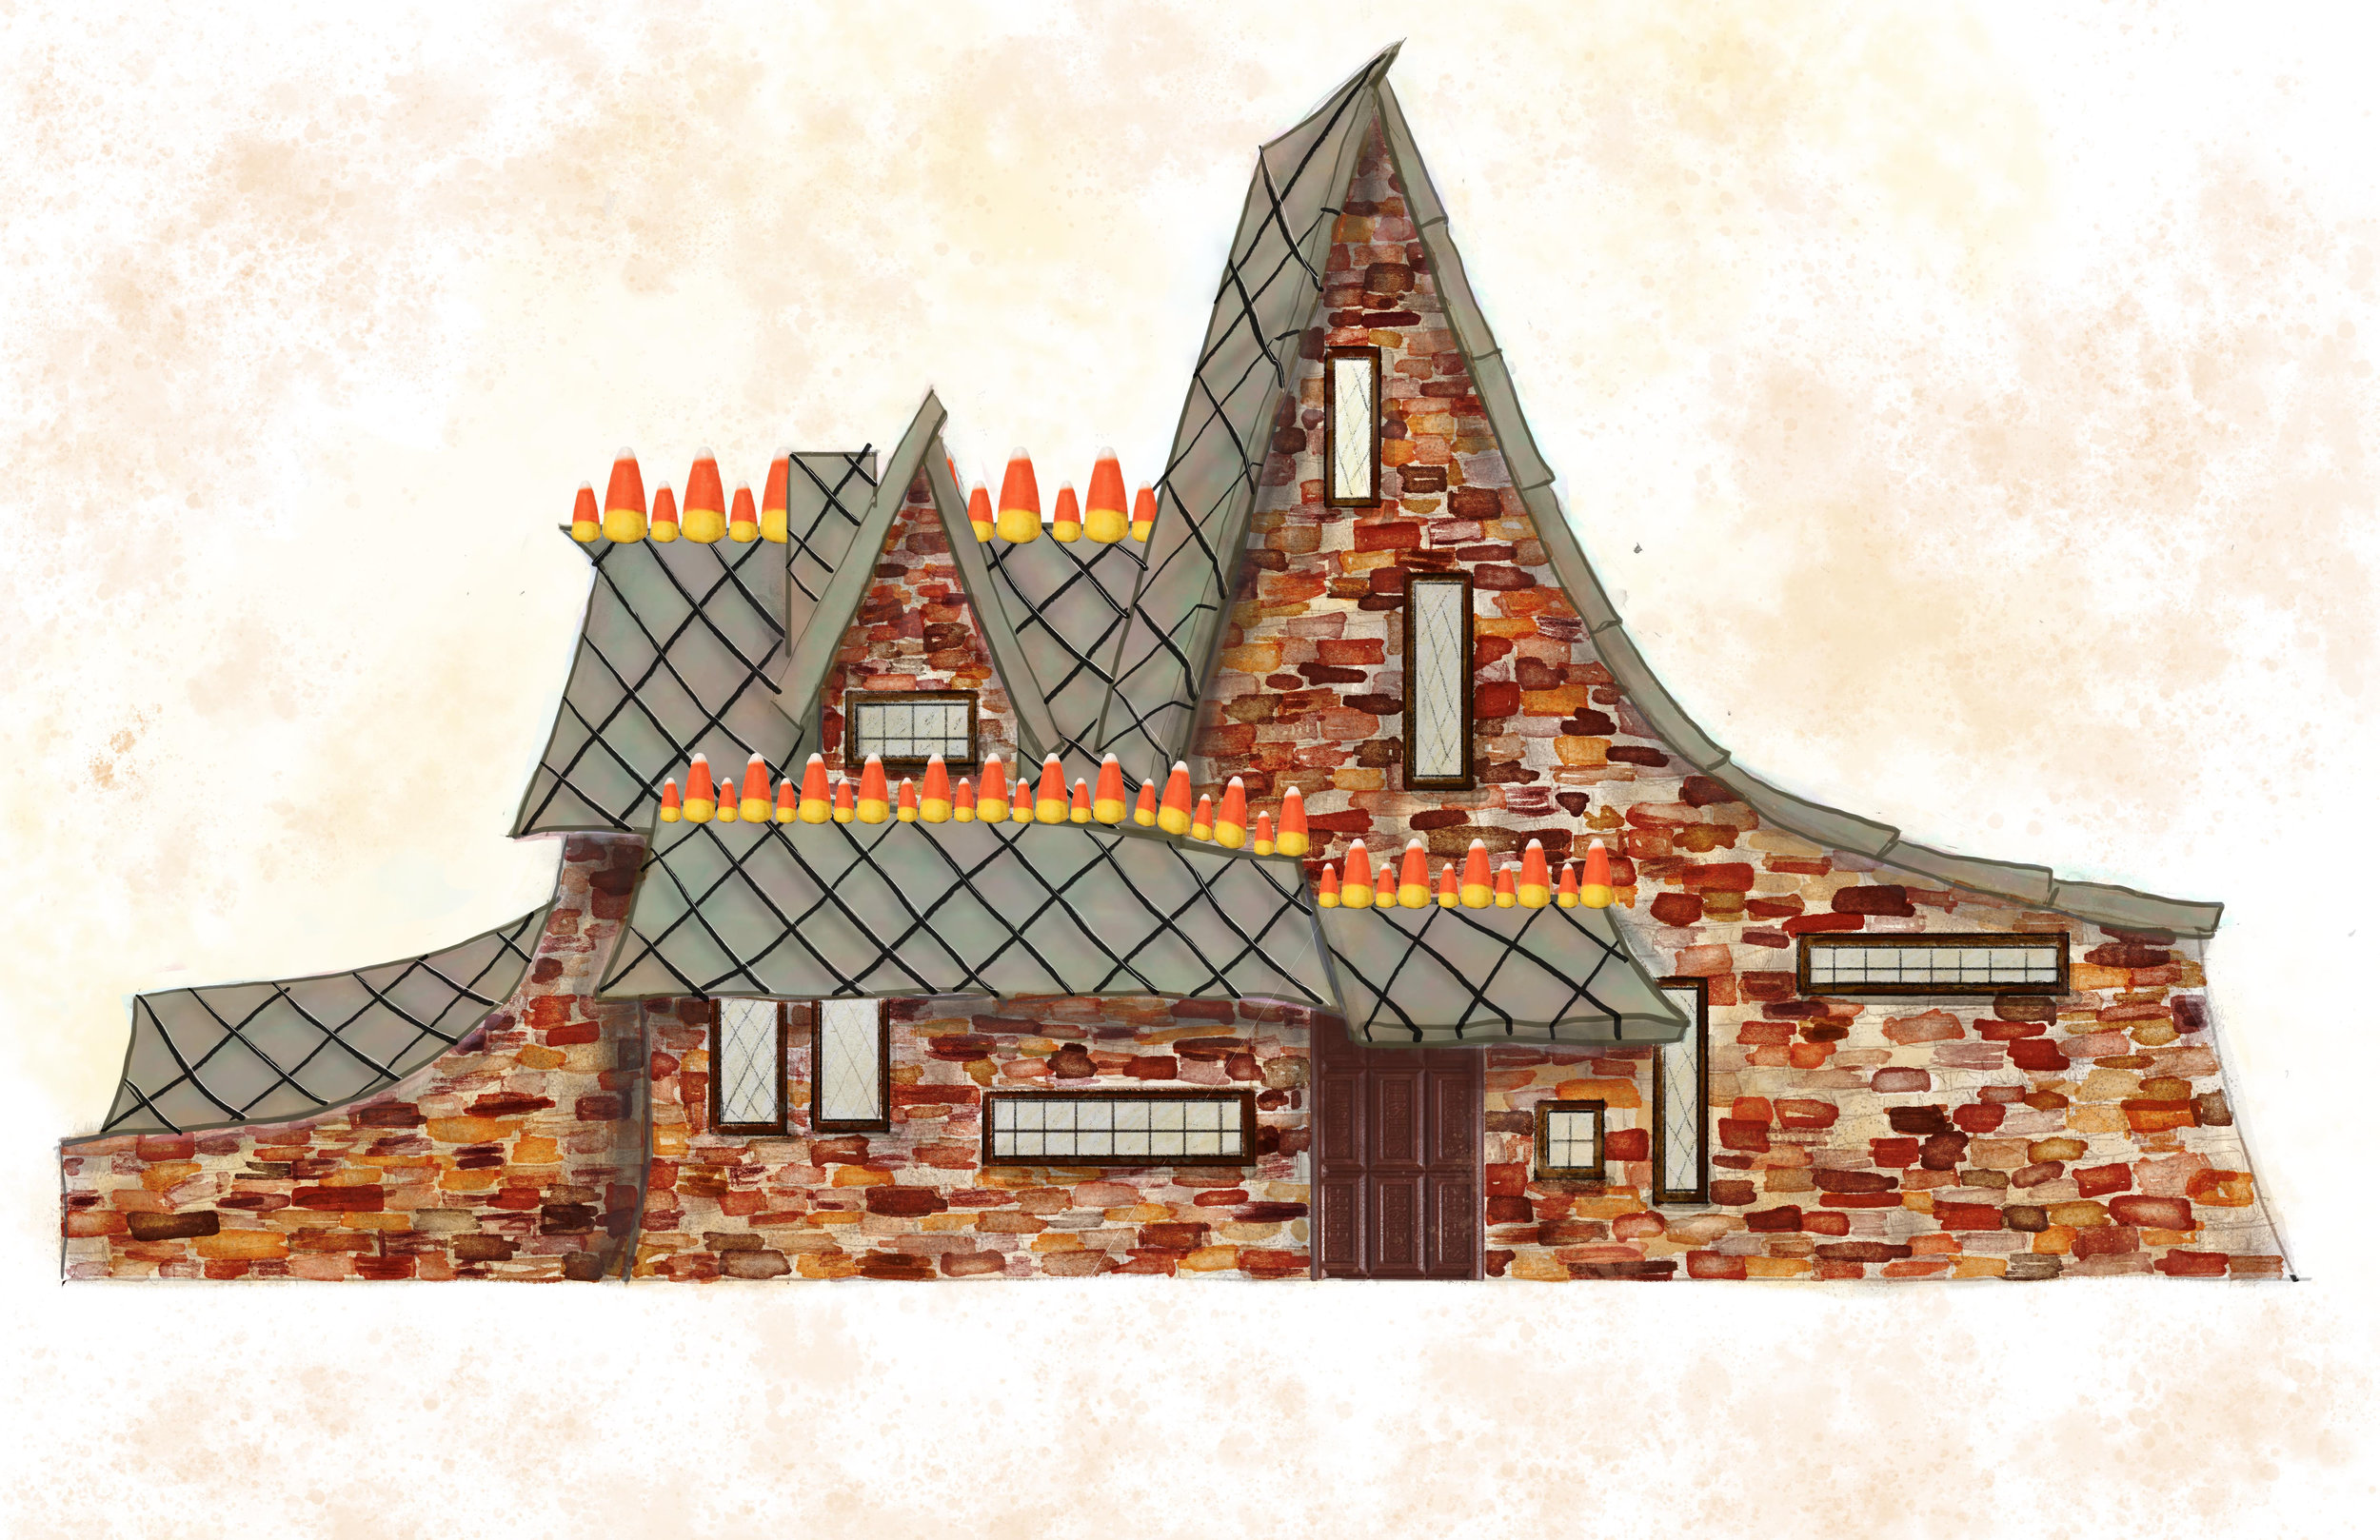  Digital rendering of a re-imagined Hansel and Gretel candy house 